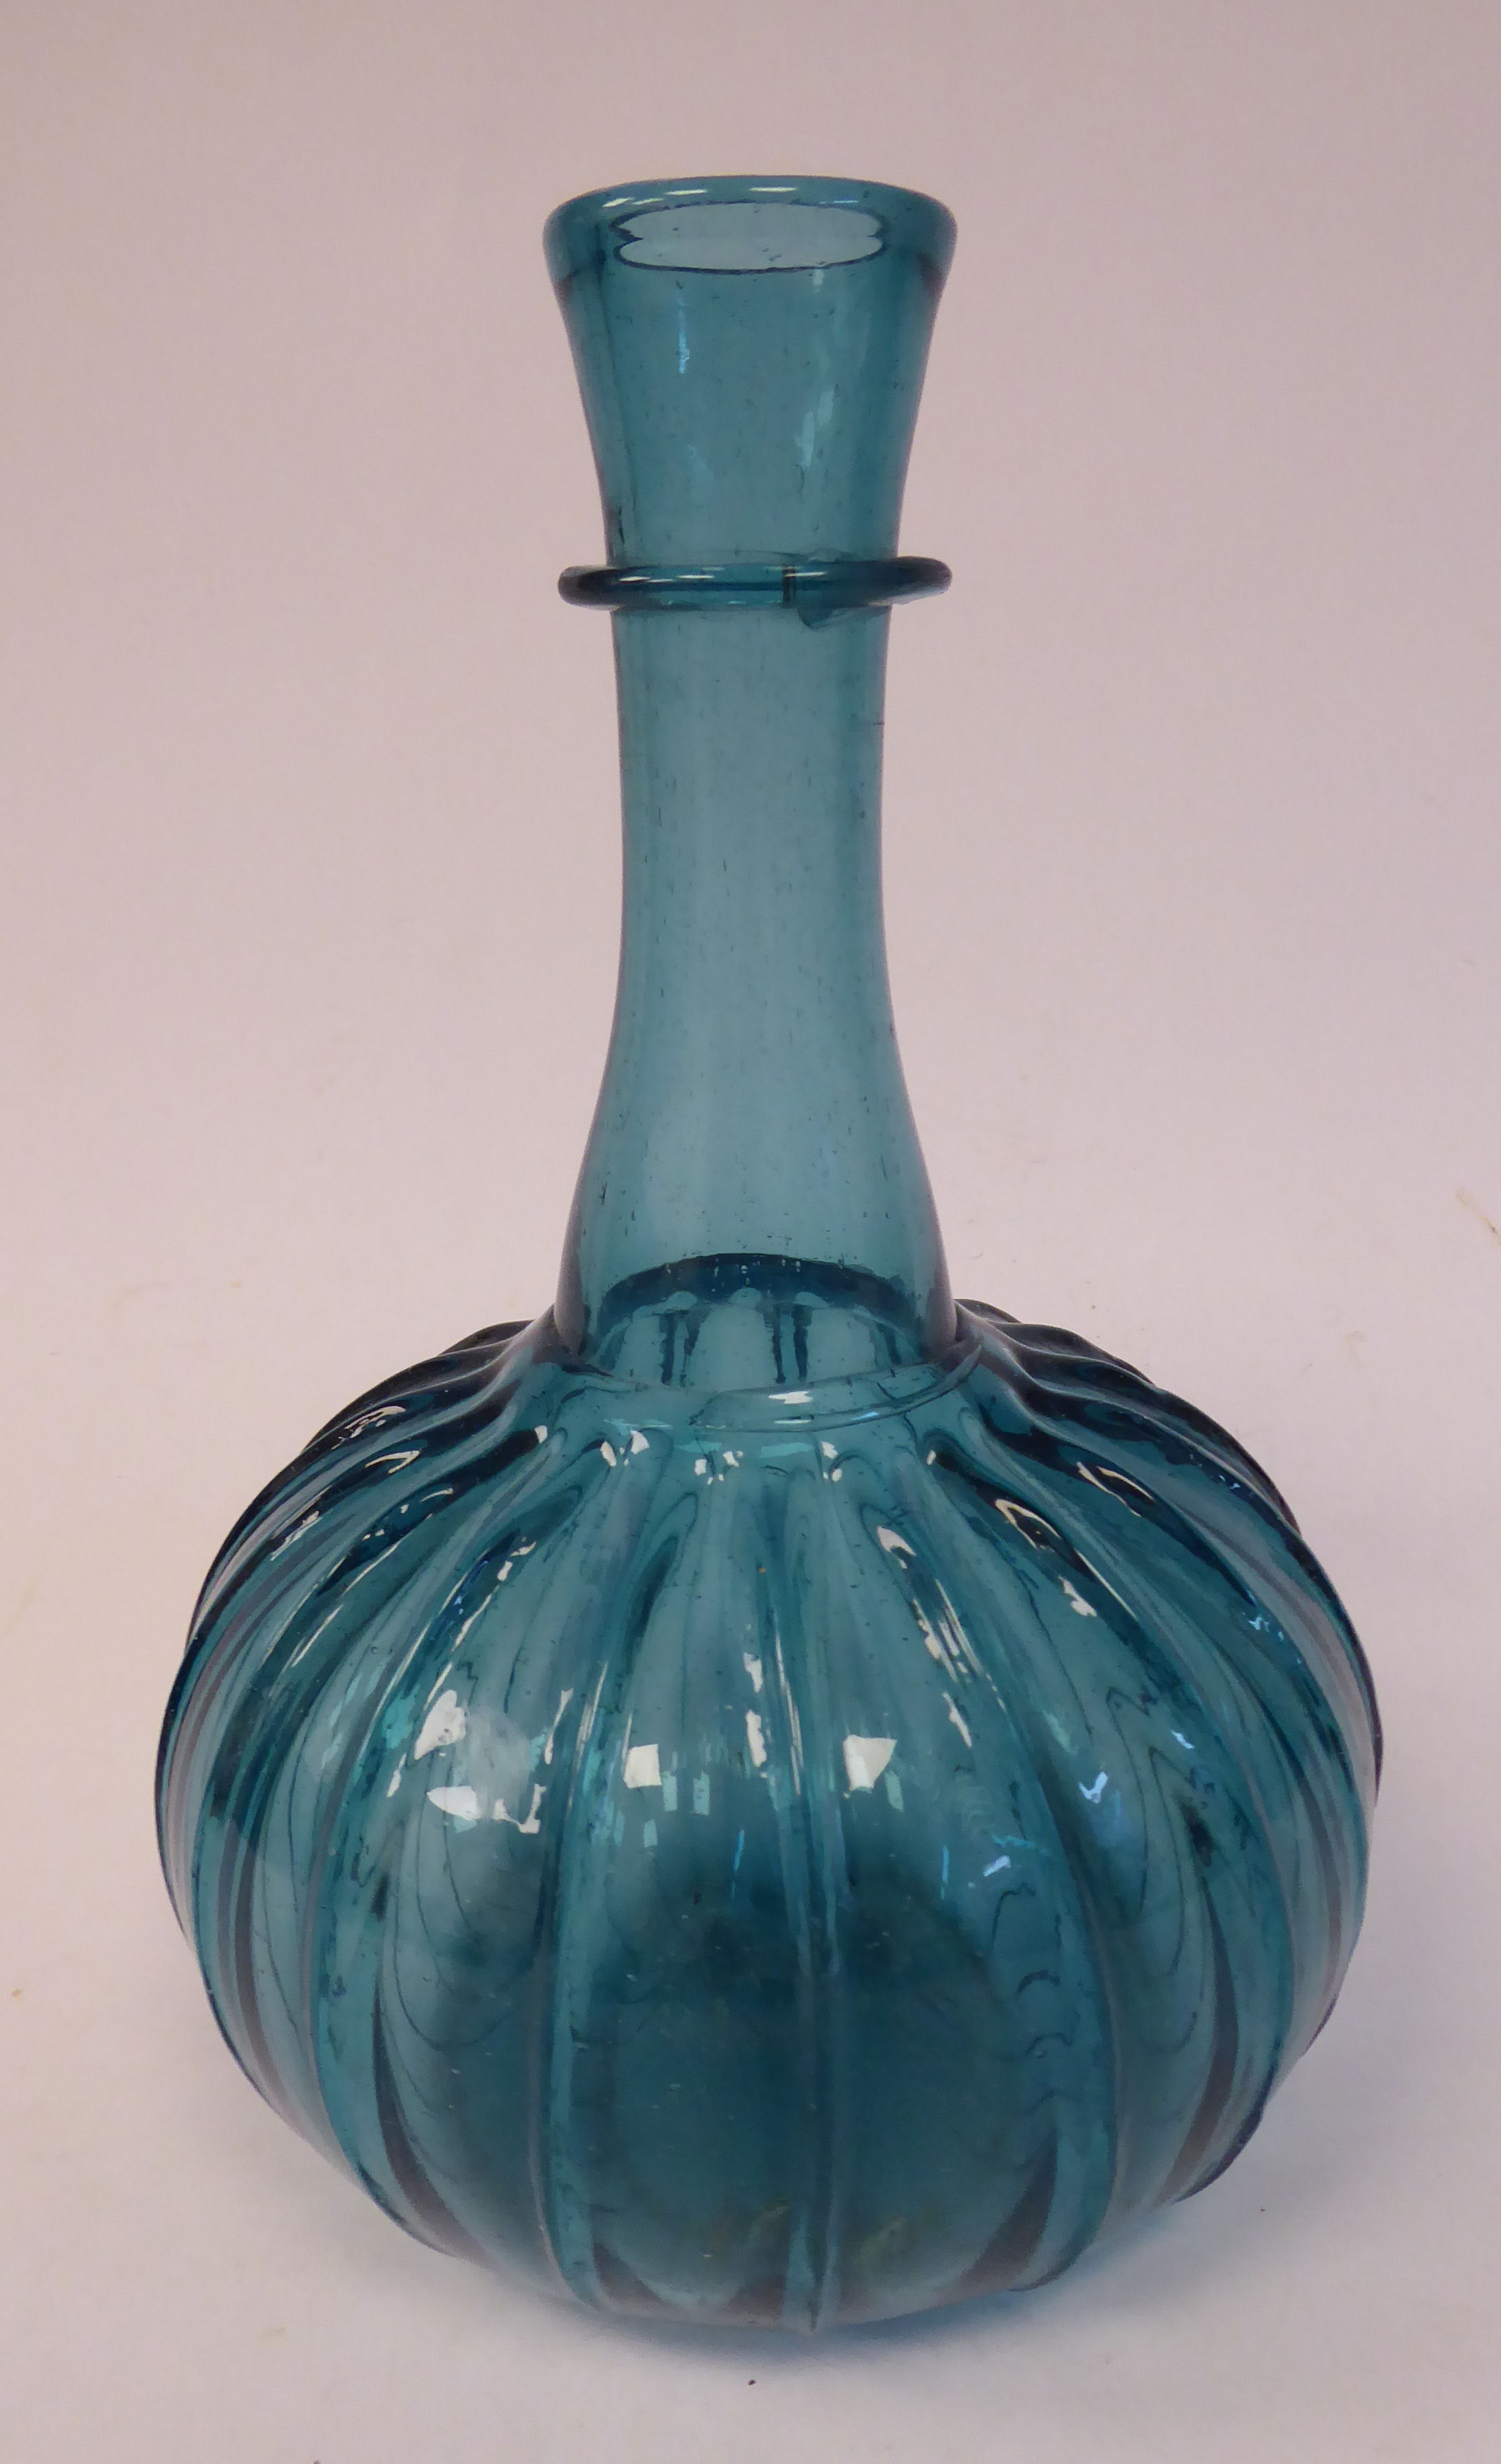 A 17thC Dutch semi-opaque turquoise glass bulbous and wide fluted bottle vase with a long, - Image 4 of 10